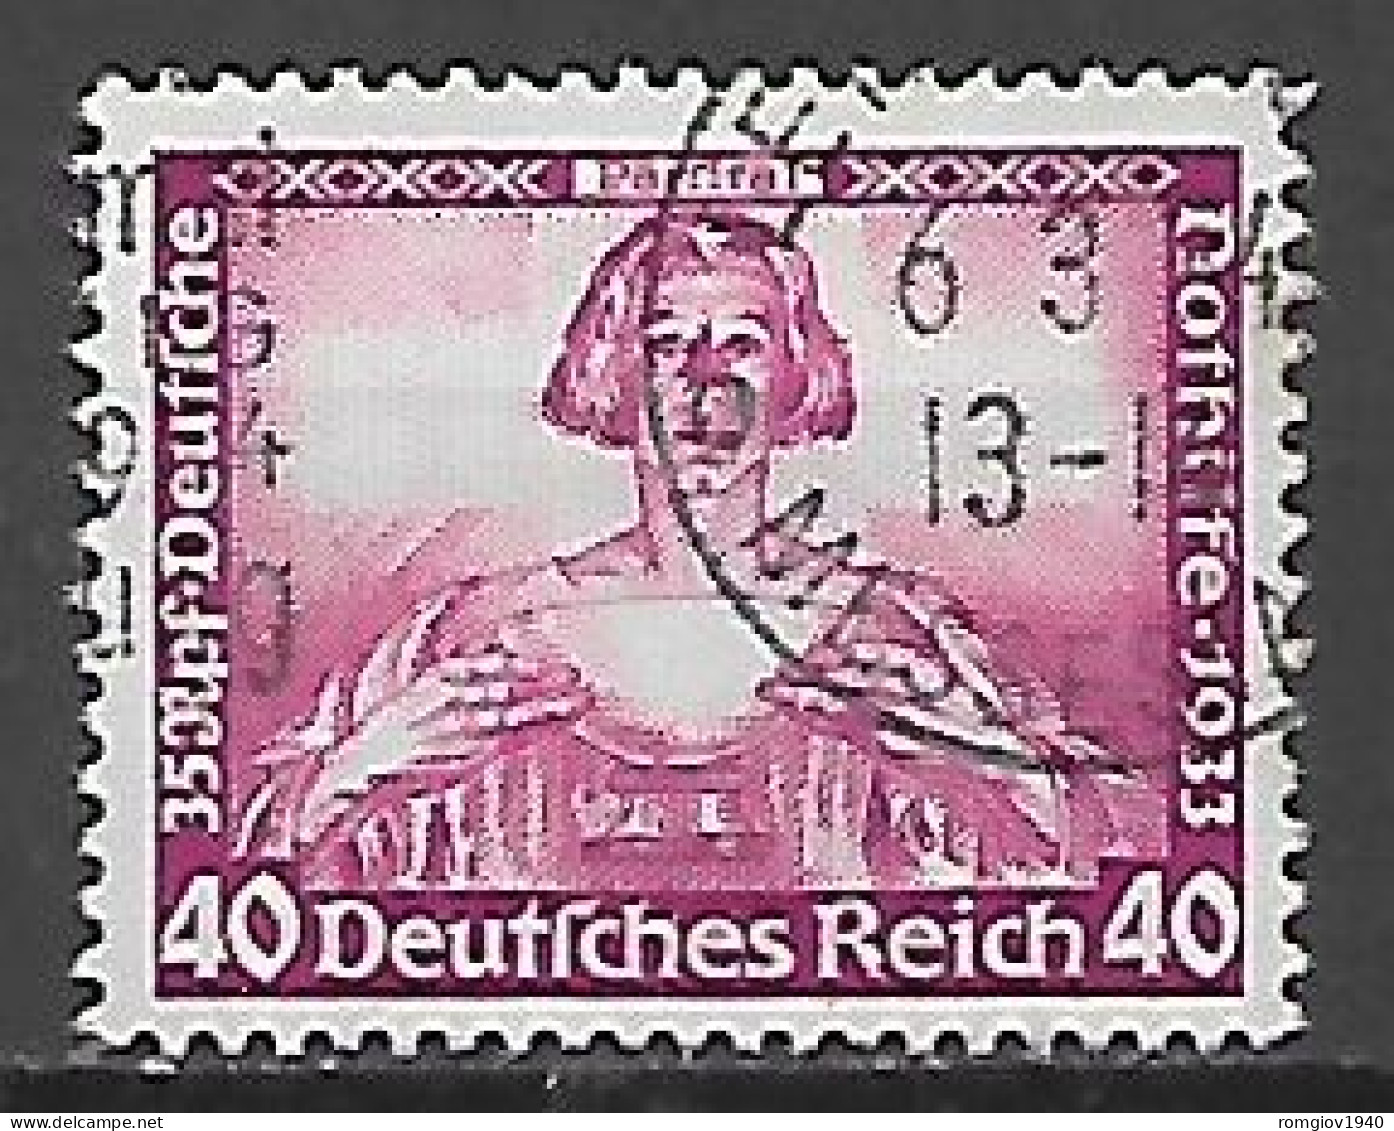 GERMANIA REICH TERZO REICH 1933 OPERE MUSICALI DI WAGNER UNIF.478  USATO VF - Used Stamps